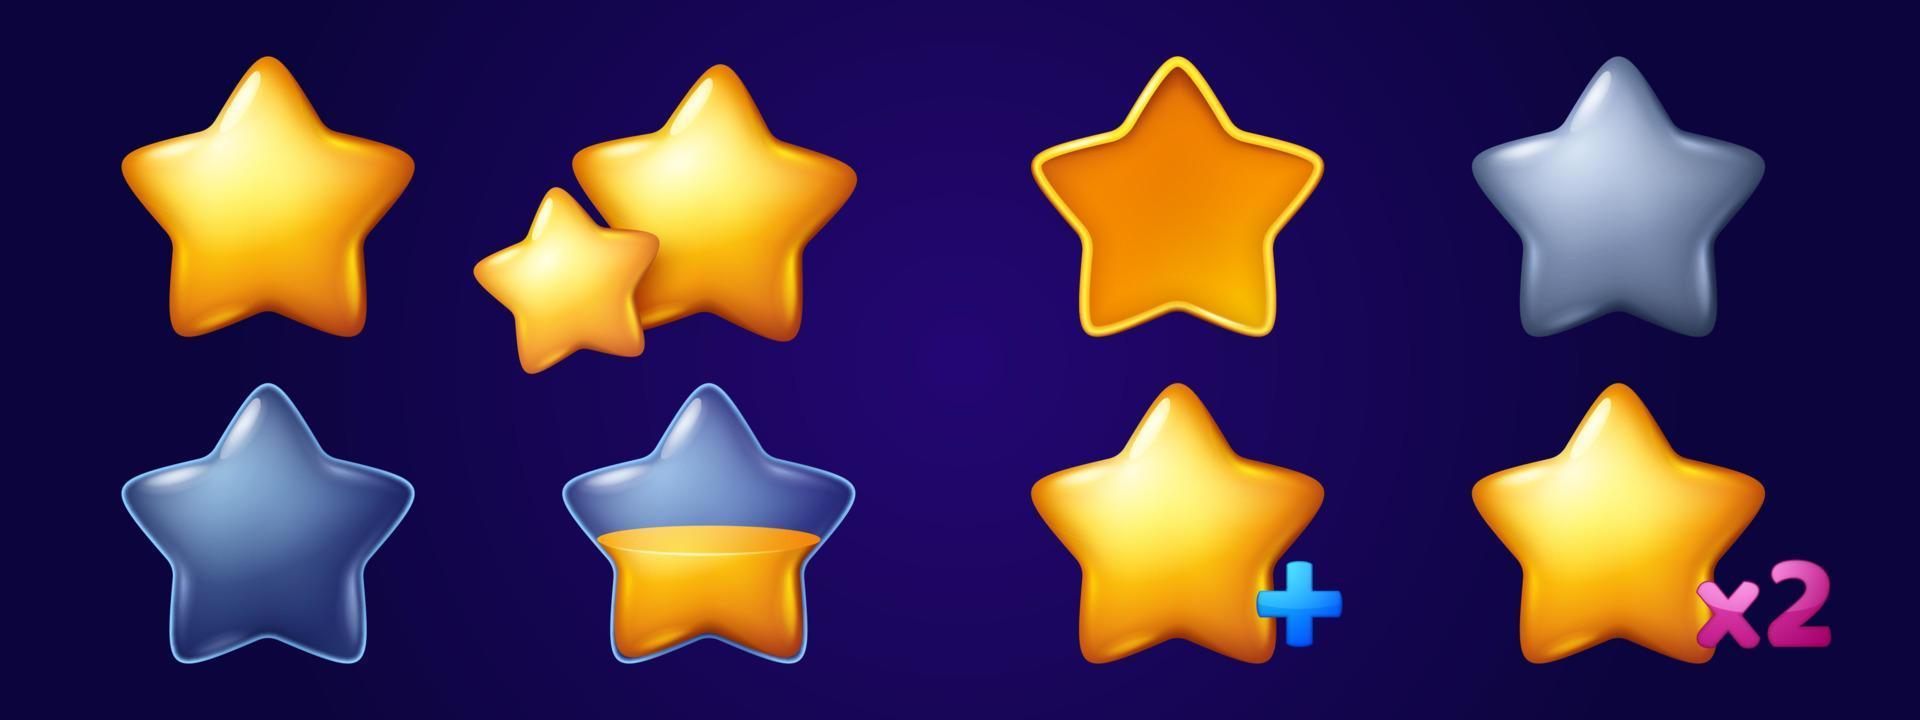 Gold stars icons for game ui interface vector